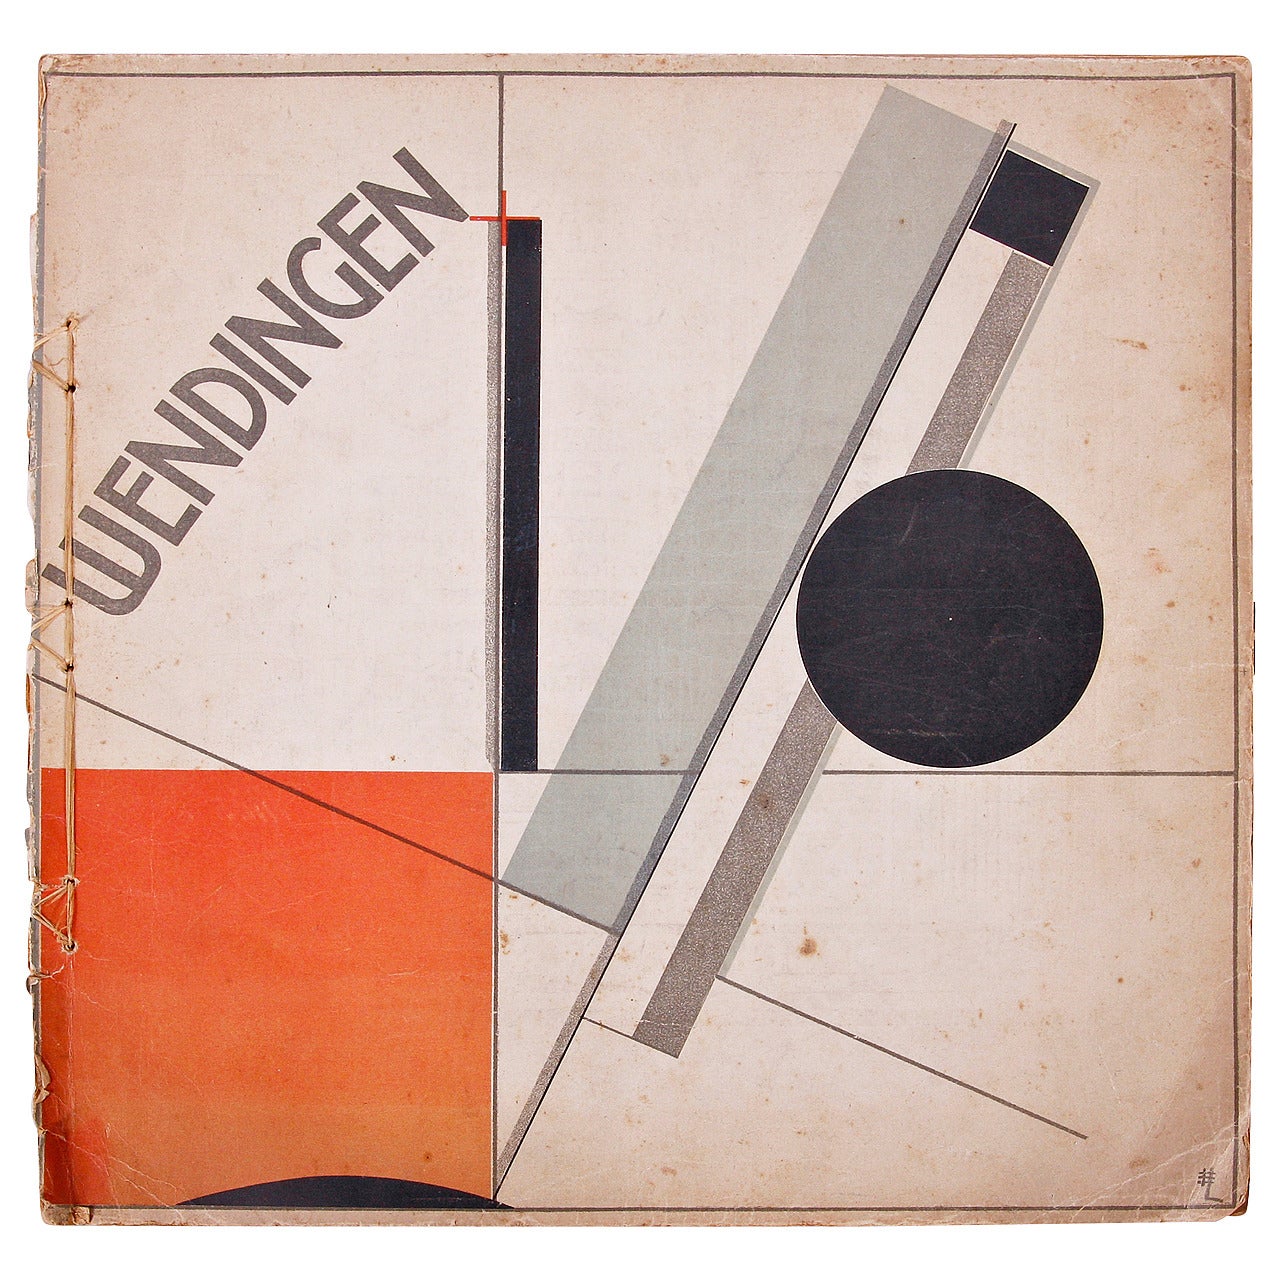 Wendingen, Issue 11, Cover by El Lissitzky, 1921